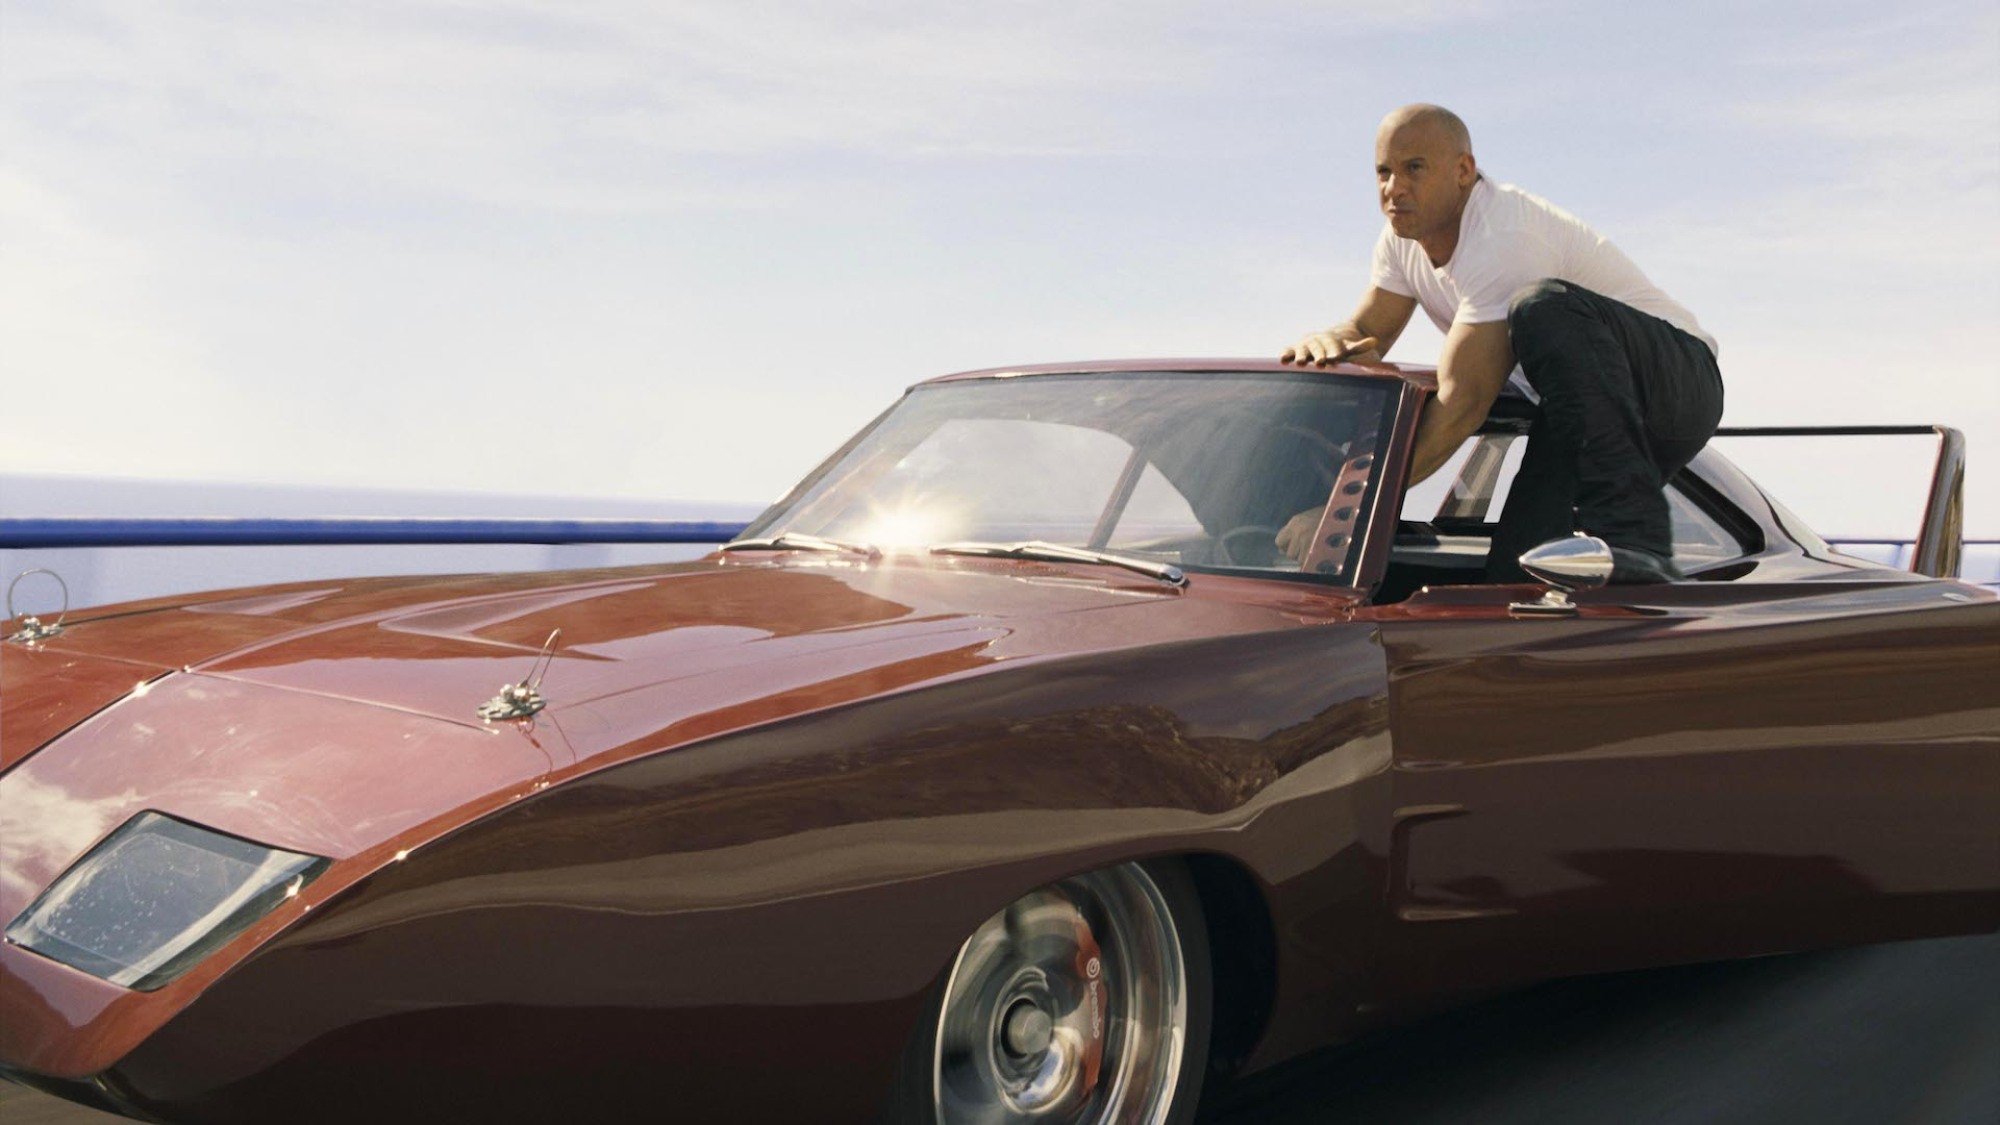 Vin Diesel stands on a speeding car in "Fast & Furious 6"